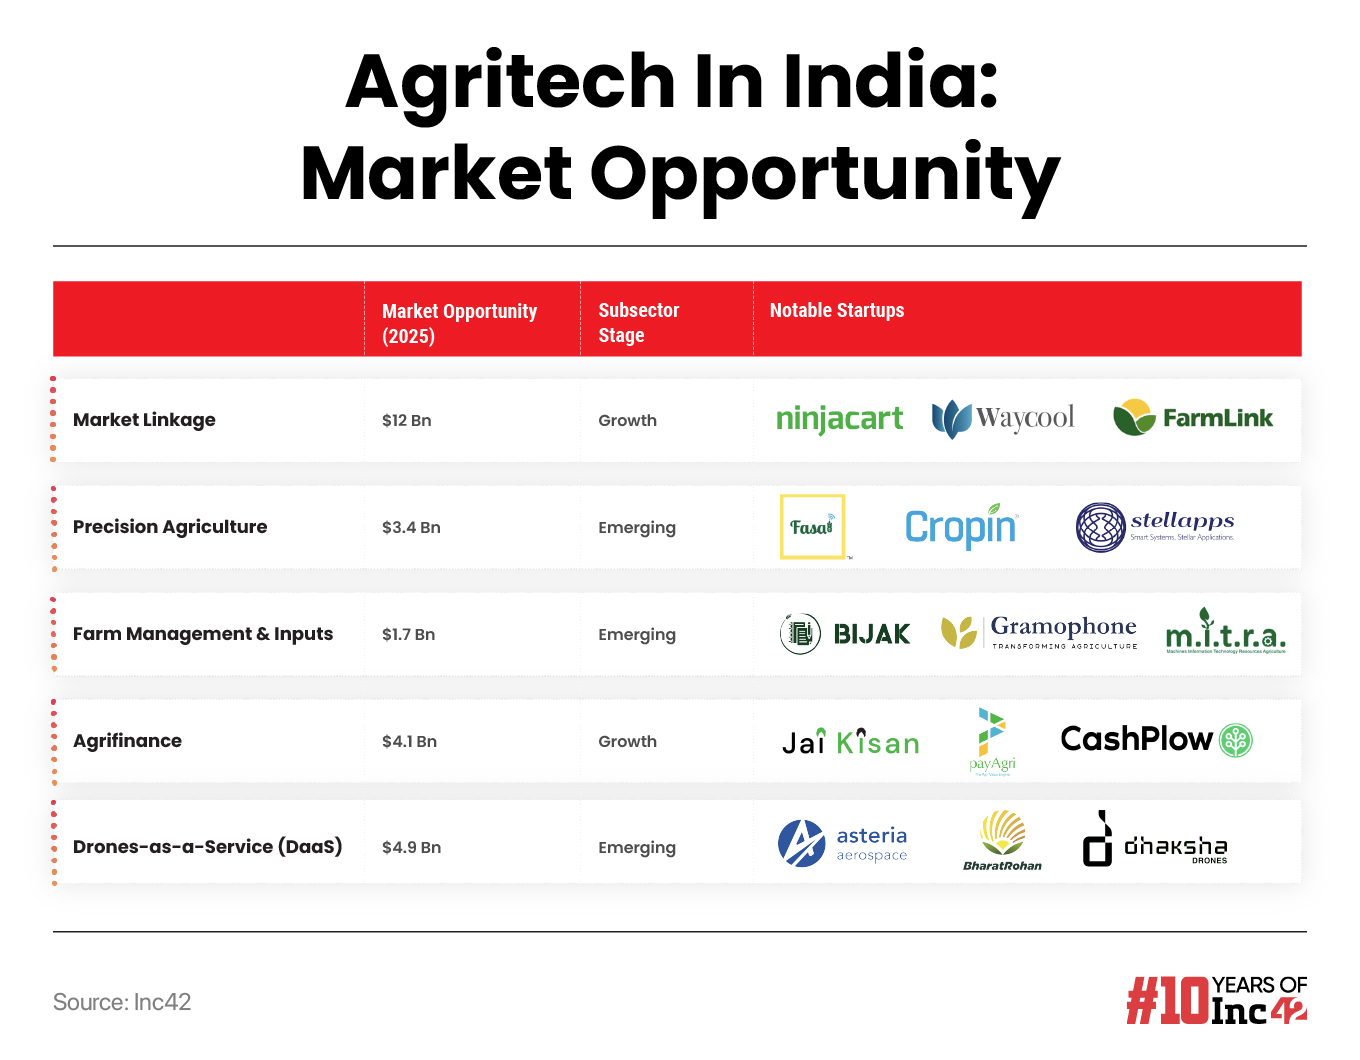 Harvesting Tech In Farming: A Deep Dive Into The $25 Bn Agritech Market Opportunity